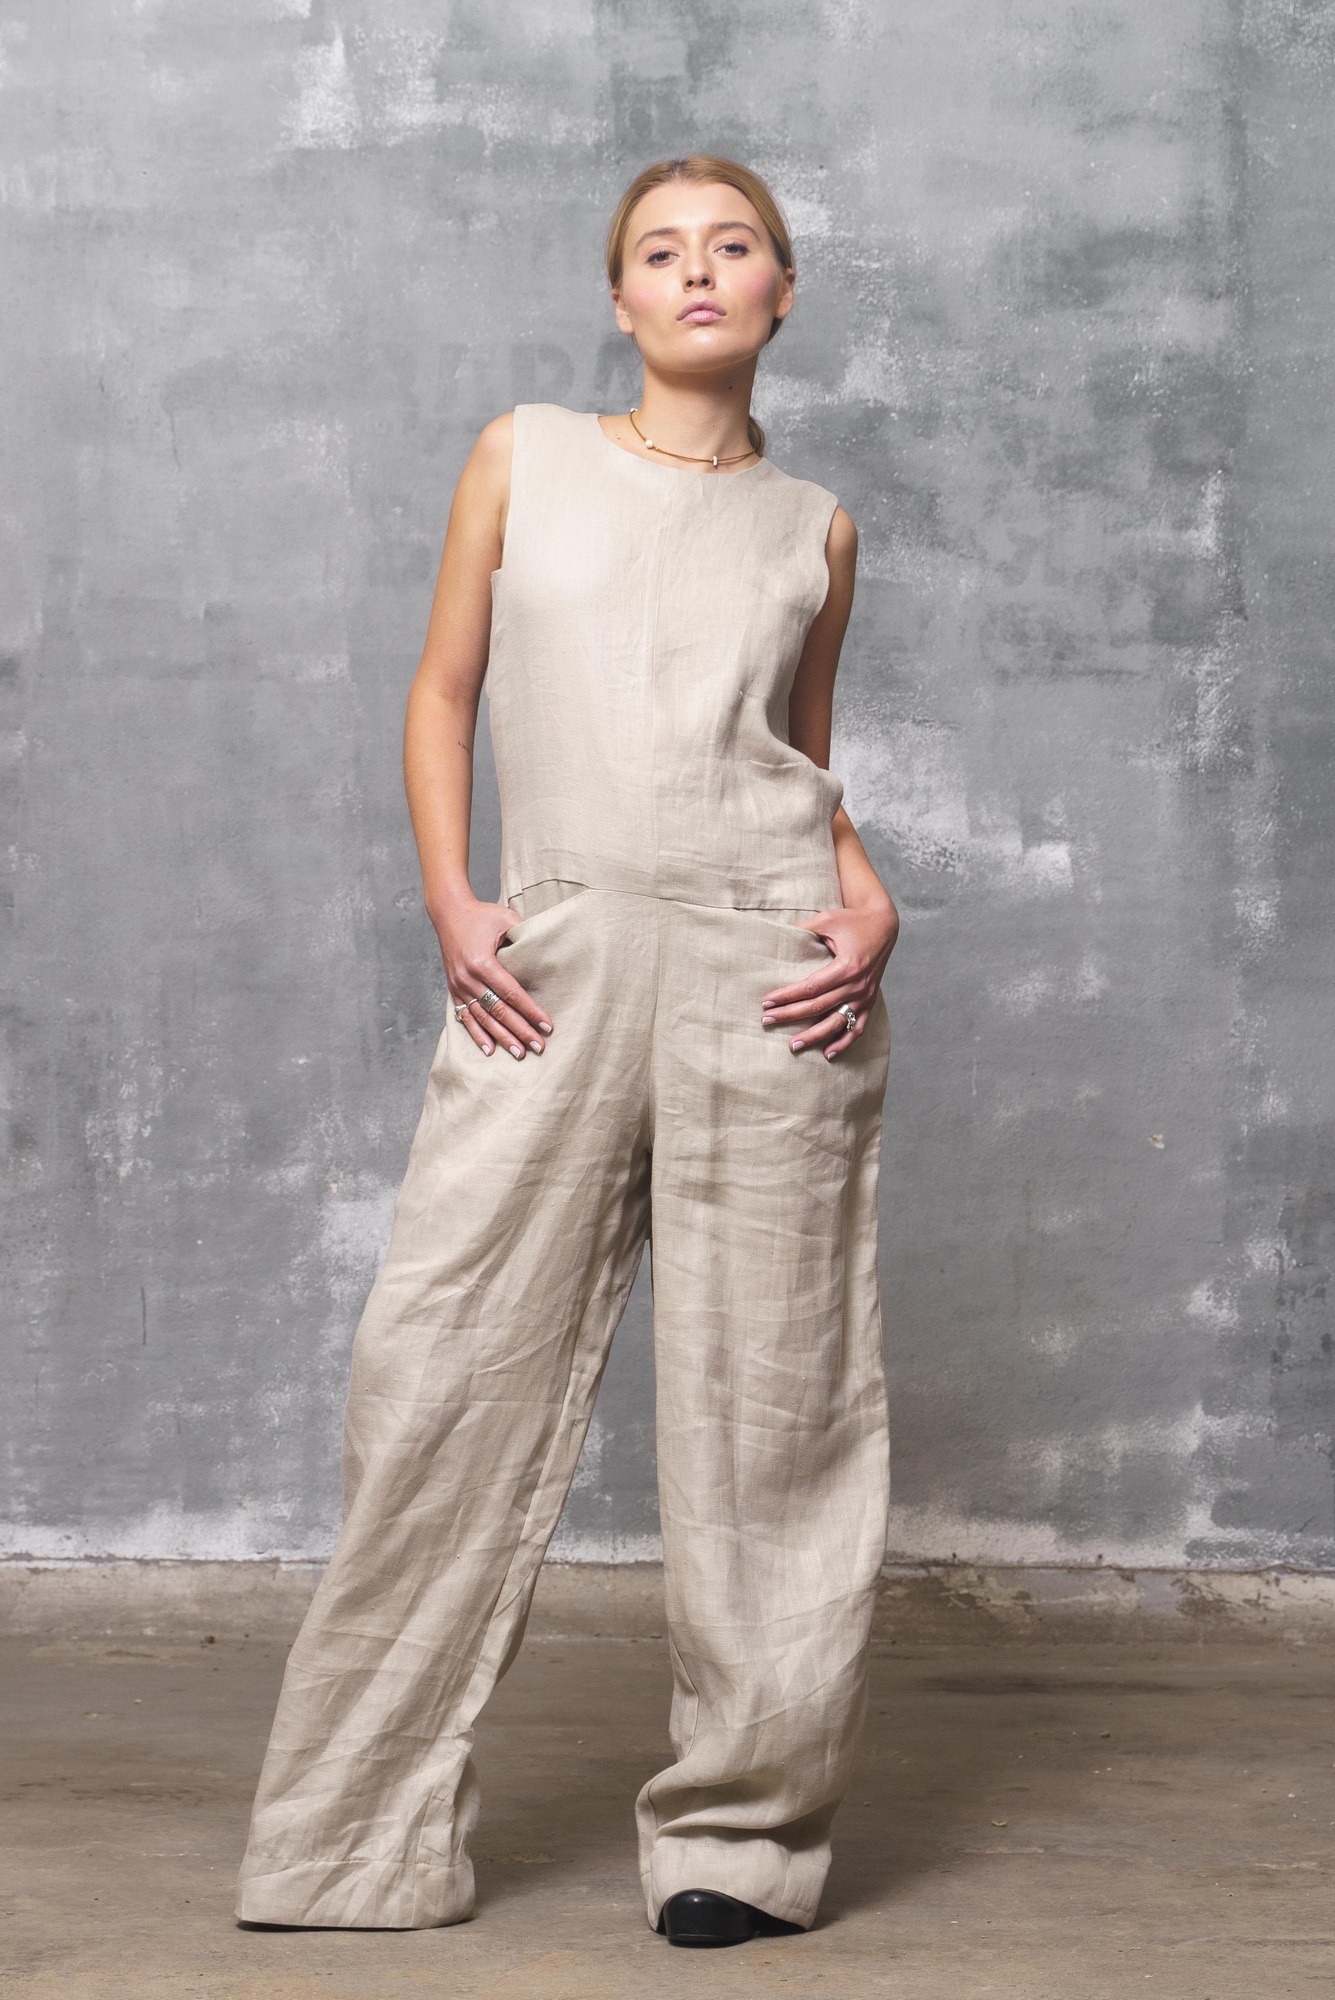 The 39 best jumpsuits for women for a flattering fit in 2023